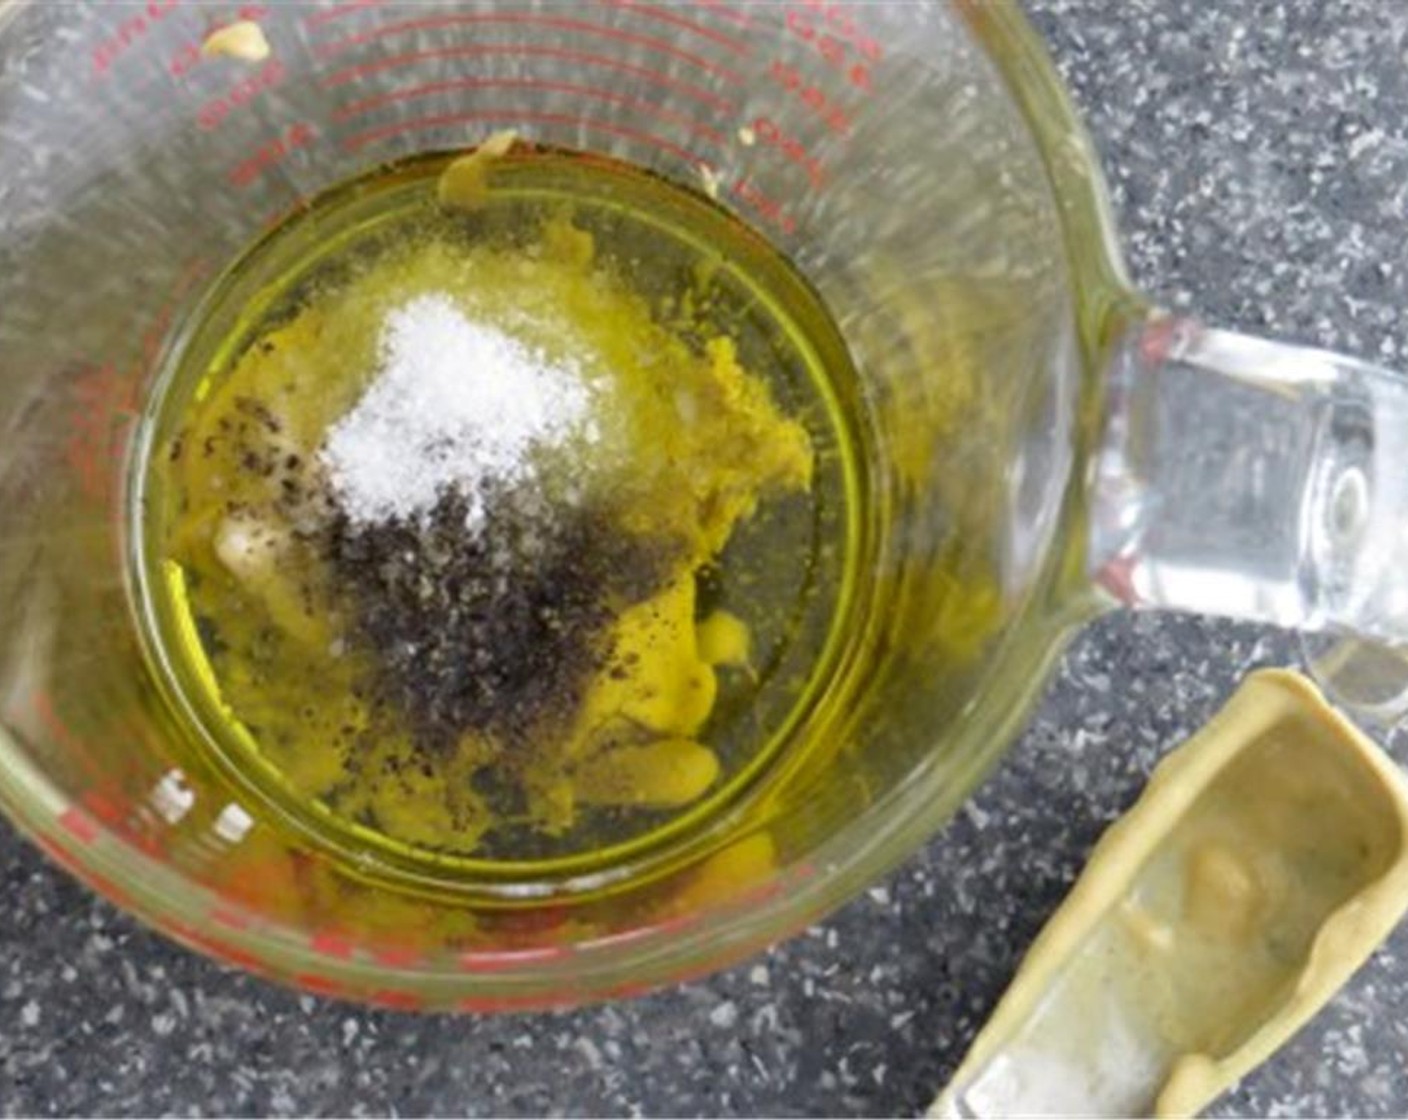 step 5 To make the dressing, combine lemon zest and juice, Olive Oil (1/2 cup), Dijon Mustard (2 Tbsp), 2 tablespoons of juice from pepperoncini pepper jar, Kosher Salt (1 tsp), and Ground Black Pepper (1 tsp) in a small bowl. Whisk.